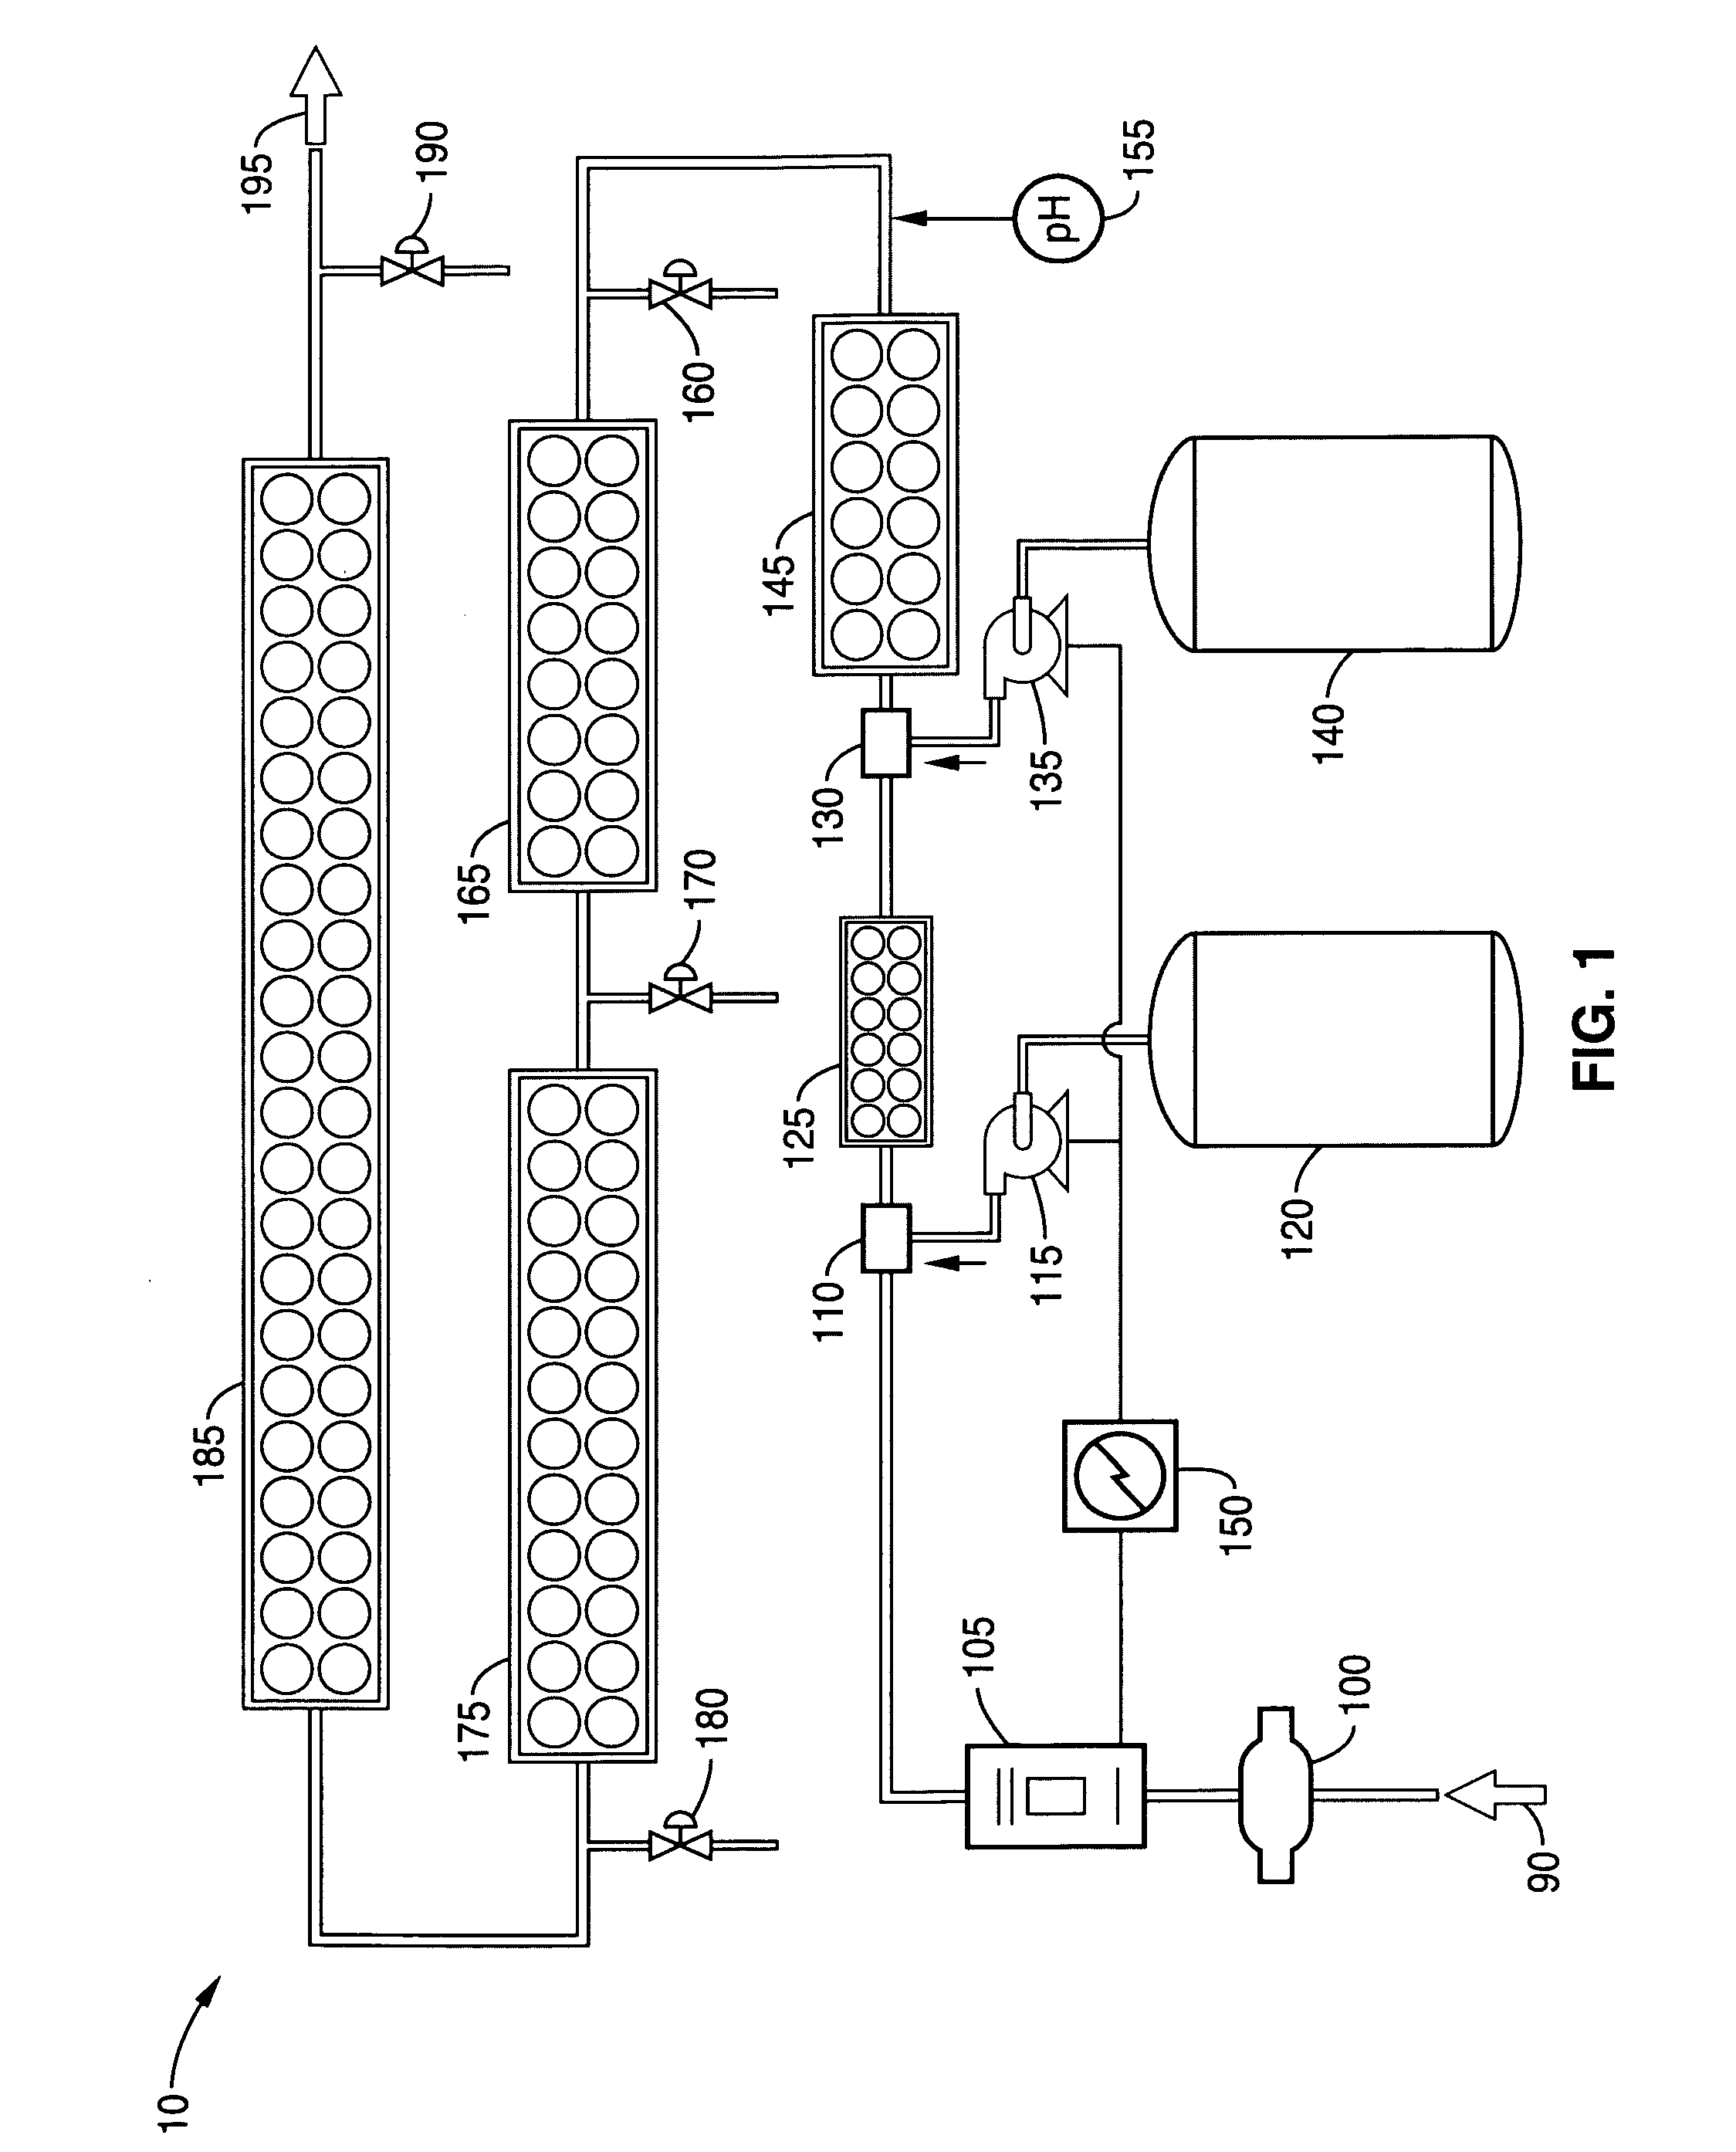 Methods of using peracetic acid to treat poultry in a chill tank during processing to increase weight